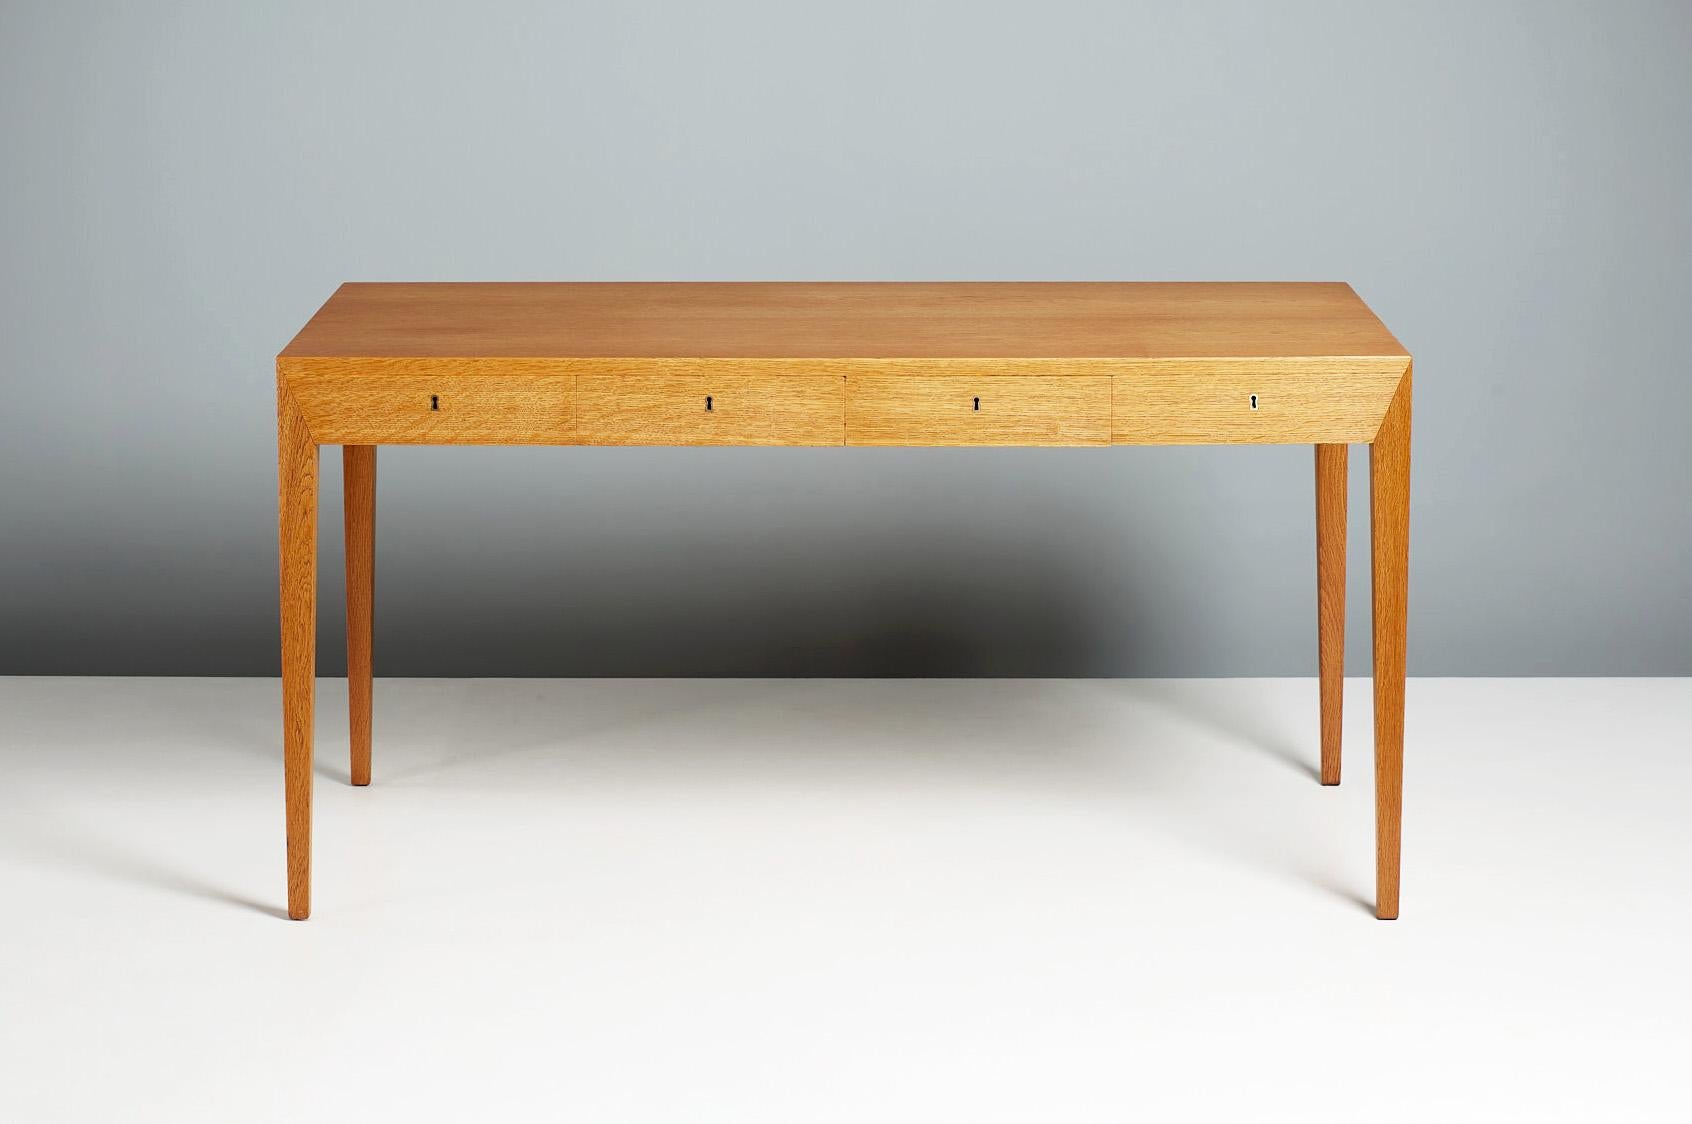 Severin Hansen - oak writing desk, c1950s

Produced by Haslev Mobelsnedkeri, Denmark and designed by Danish master Severin Hansen Jnr. This desk is Hansen's best-loved and most collectible design from his distinguished career. This example was